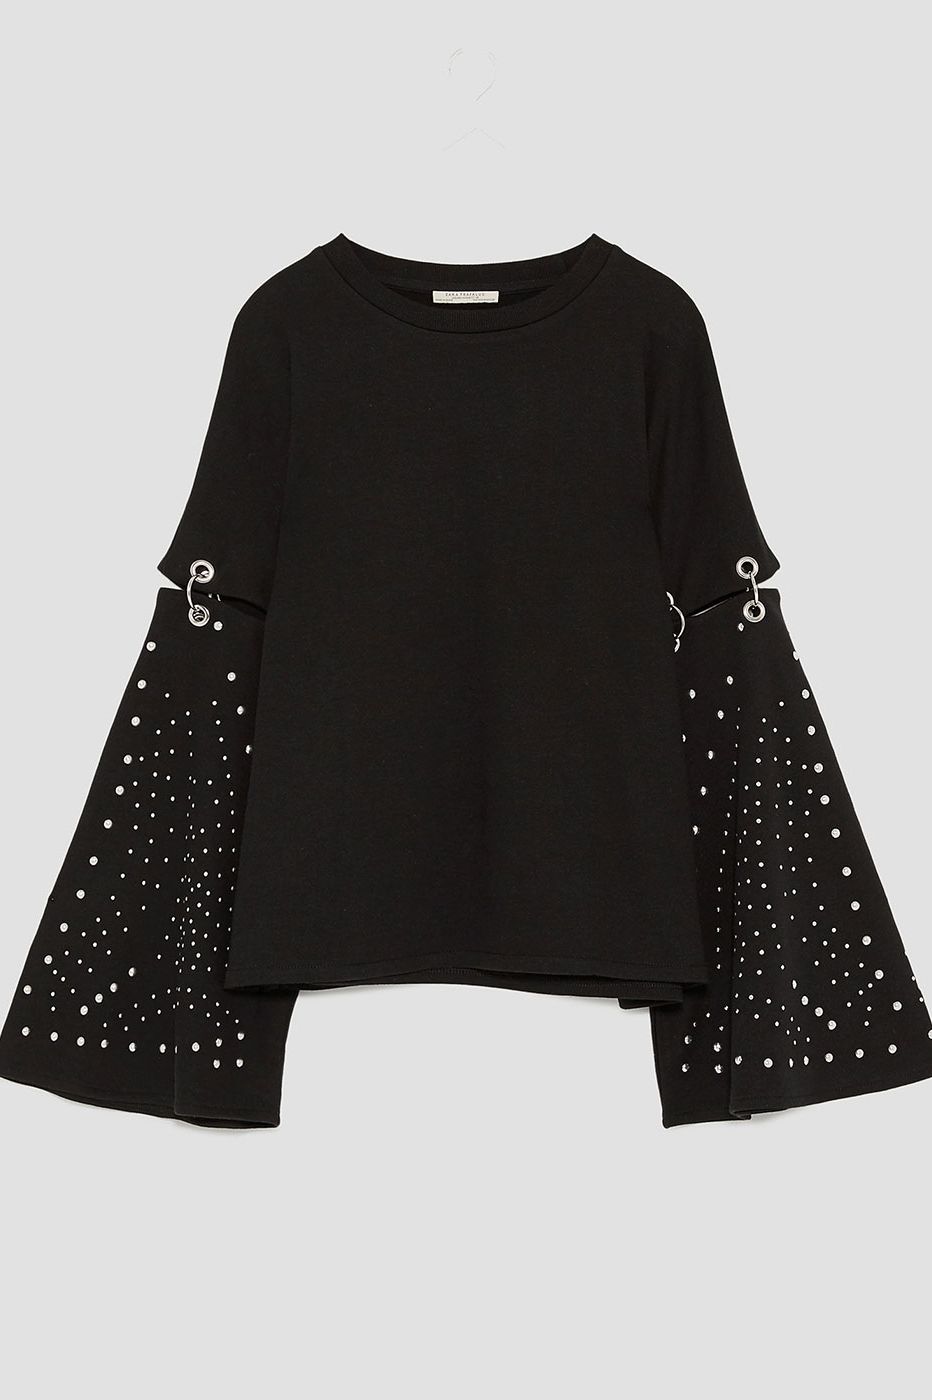 Clothing, Black, Sleeve, Outerwear, Blouse, Design, Pattern, T-shirt, Top, 